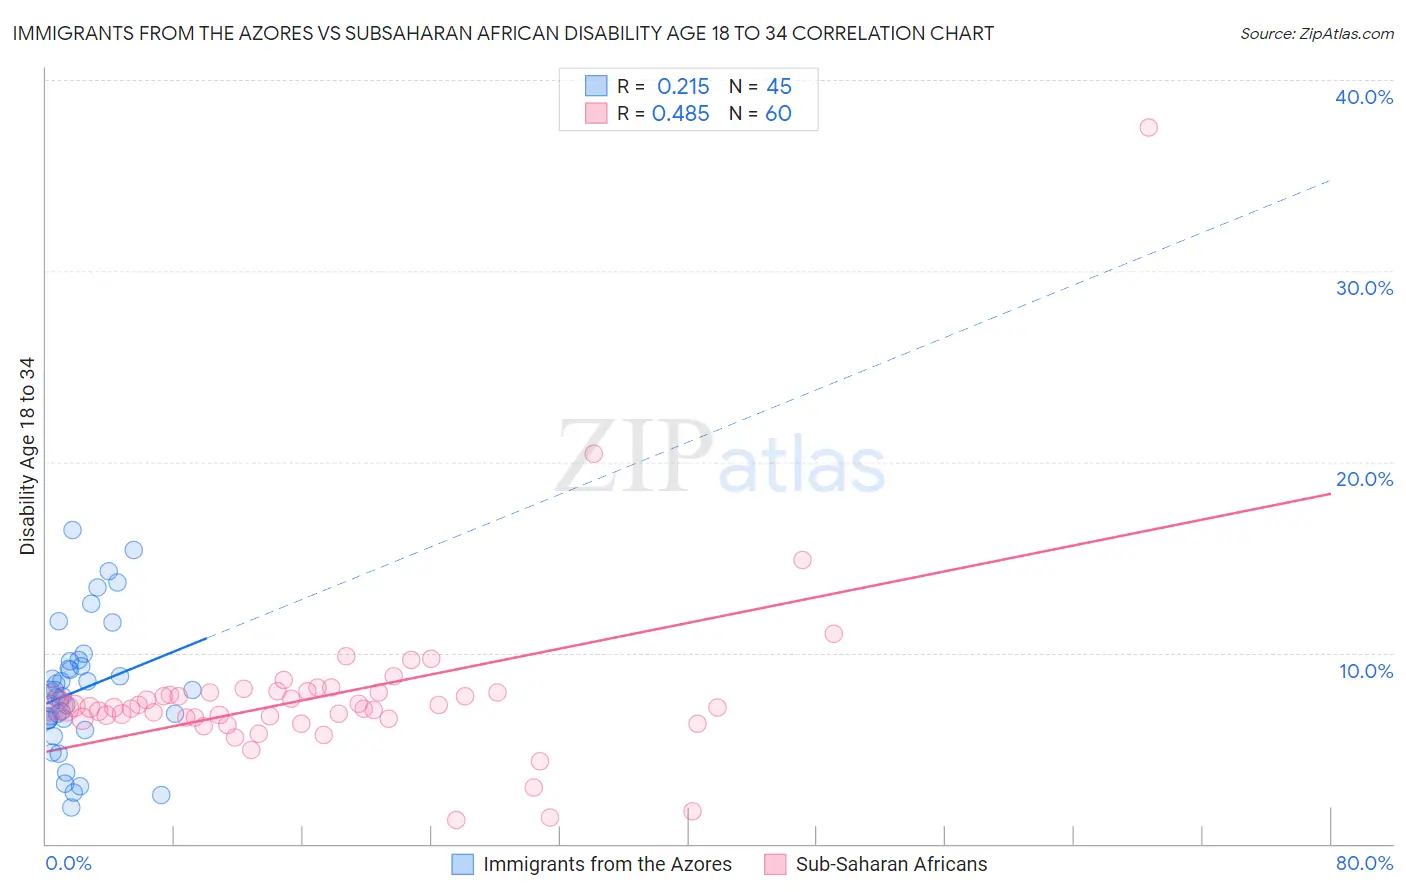 Immigrants from the Azores vs Subsaharan African Disability Age 18 to 34